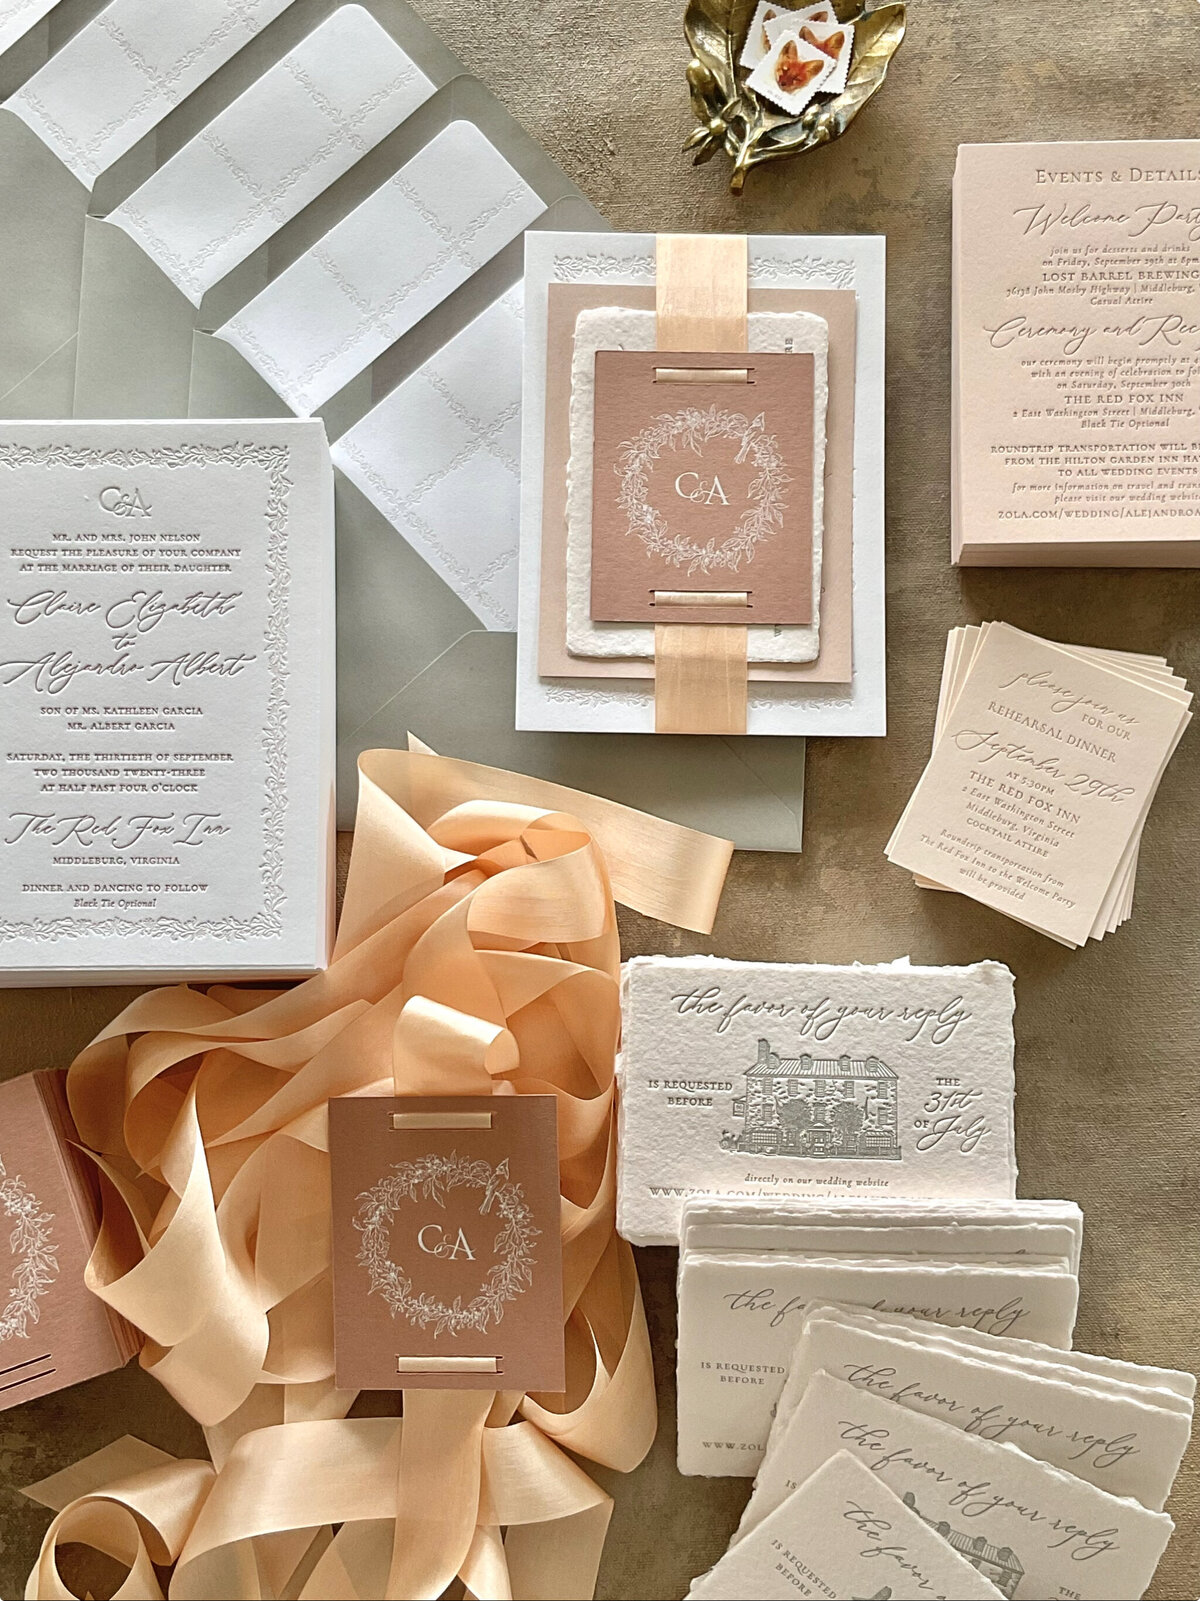 Wedding stationeries with custom calligraphy